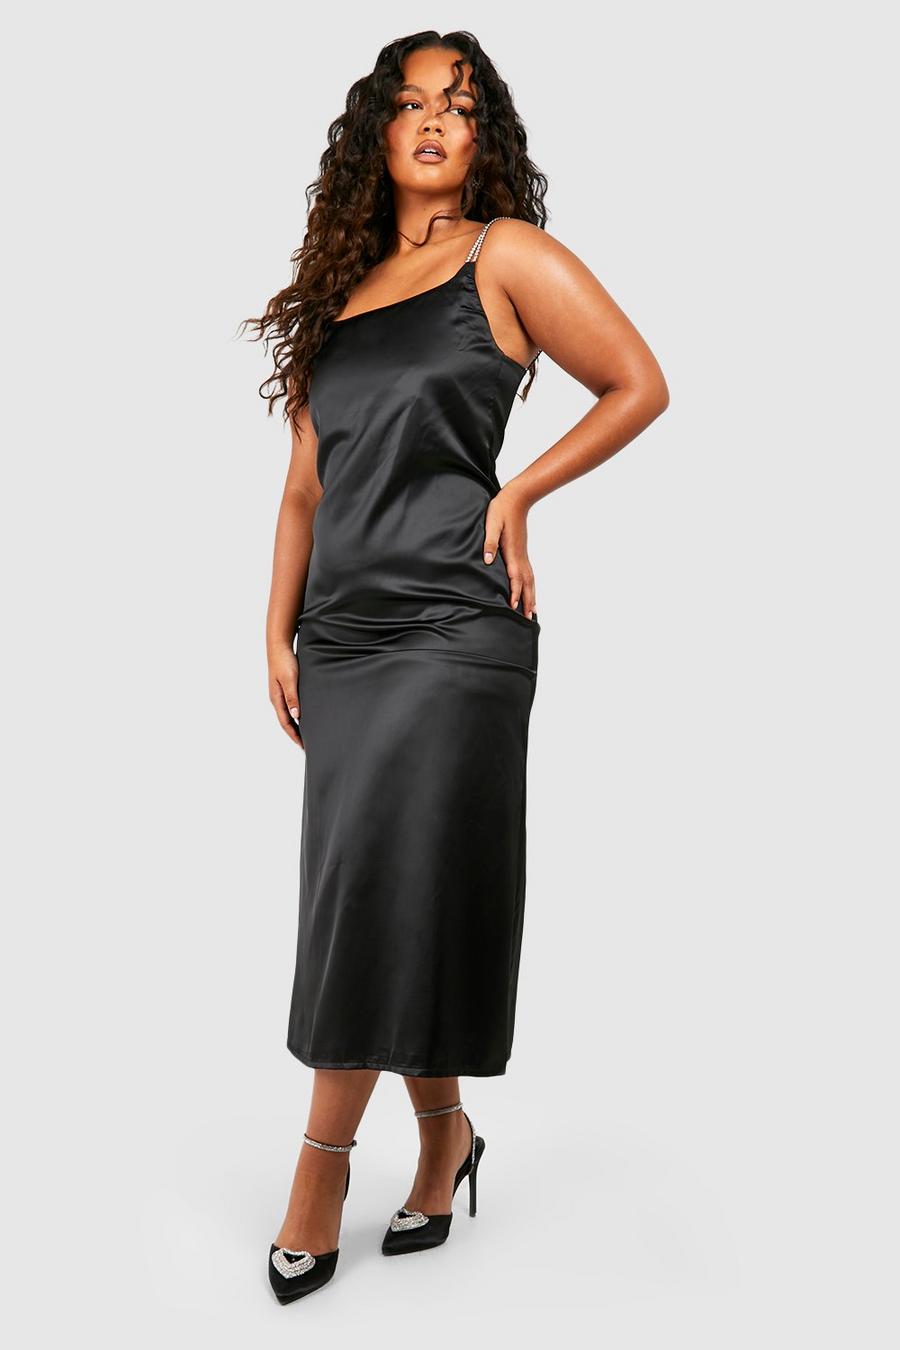 Satina Plus-Sized Clothing On Sale Up To 90% Off Retail